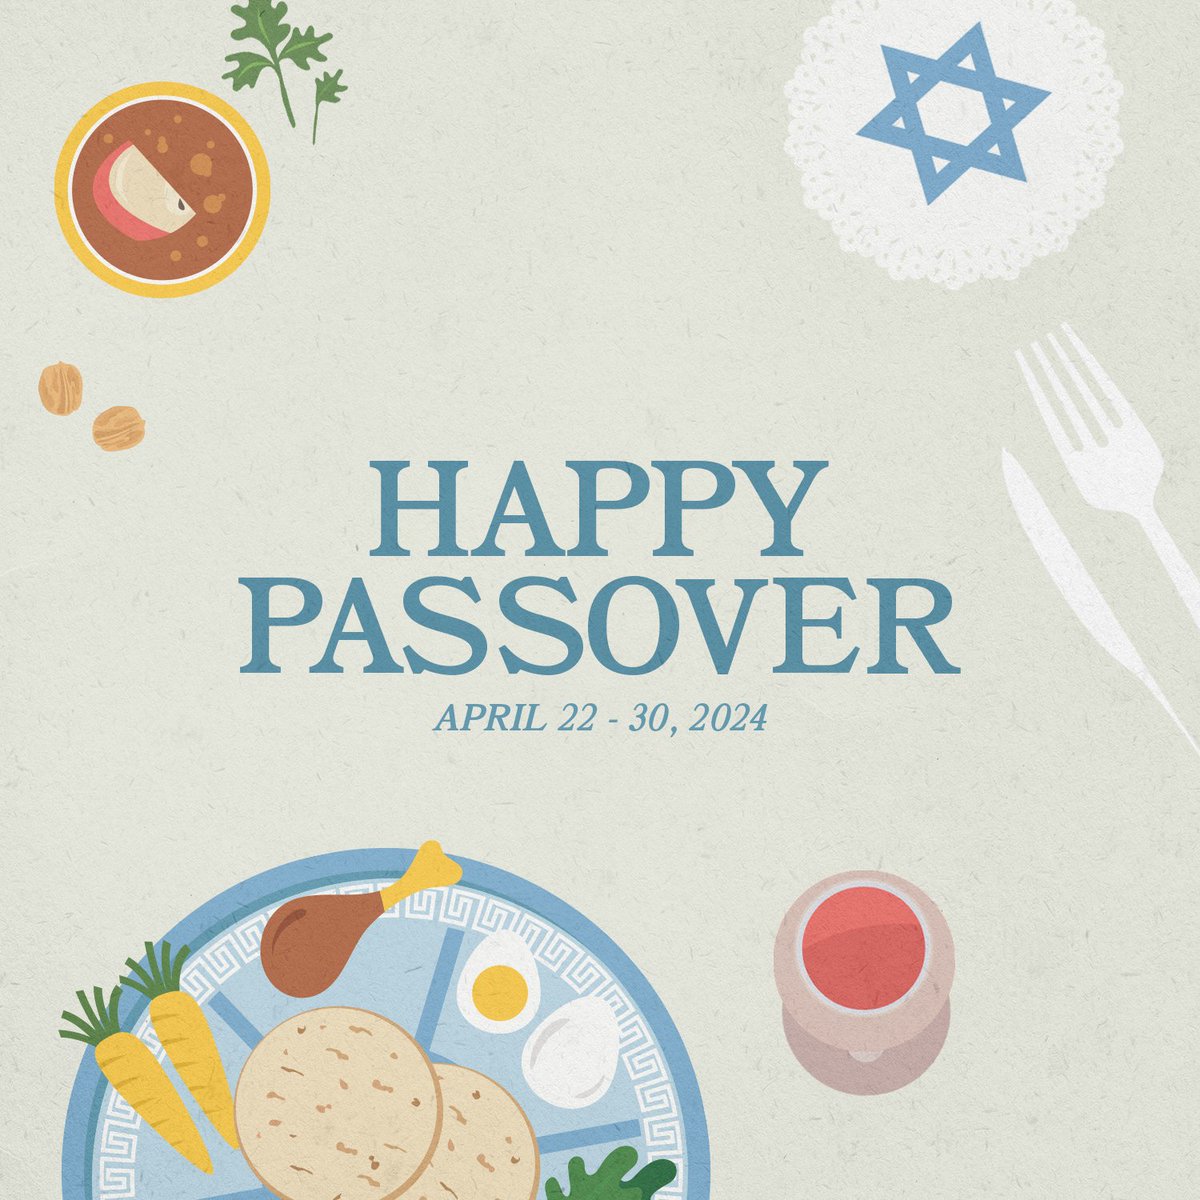 The first day of the Passover feast begins this evening at sundown, commemorating the Exodus and liberation of the Israelites from Egypt. Given the insidious rise of anti-Semitism across our country, it has never been more important to demonstrate our solidarity with and support…